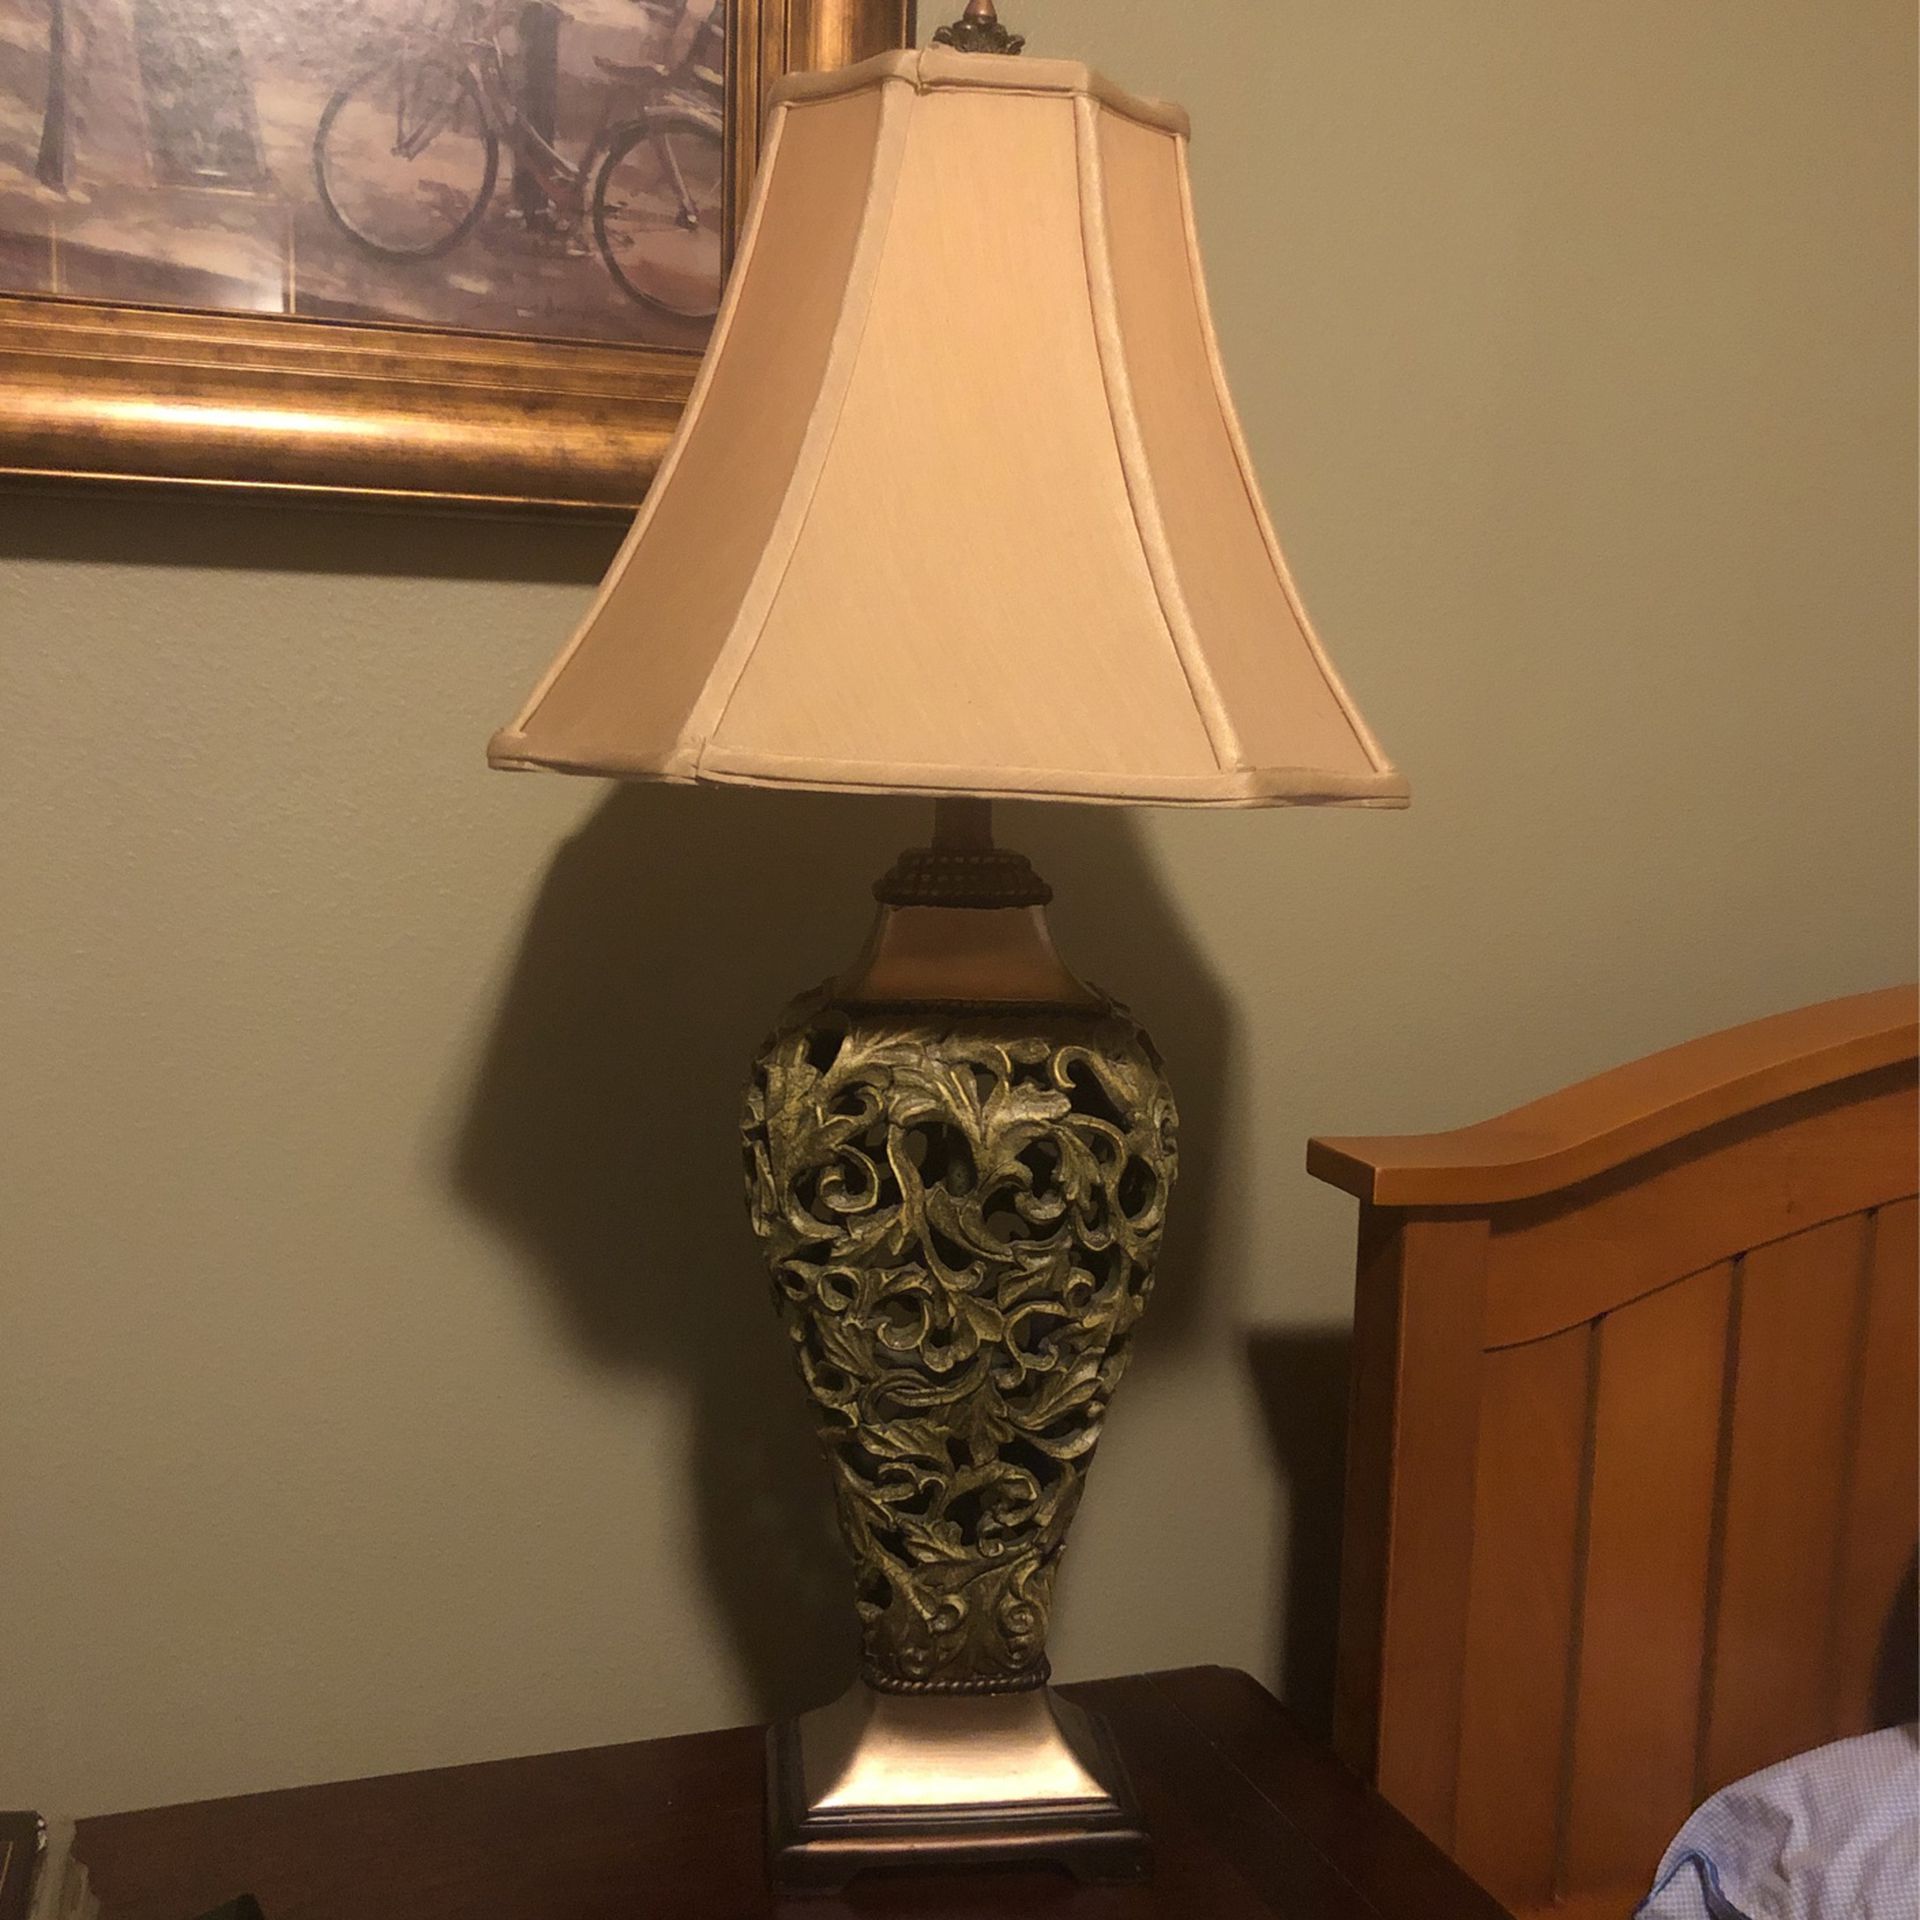 Vintage lamps price to sell. Price is for the set